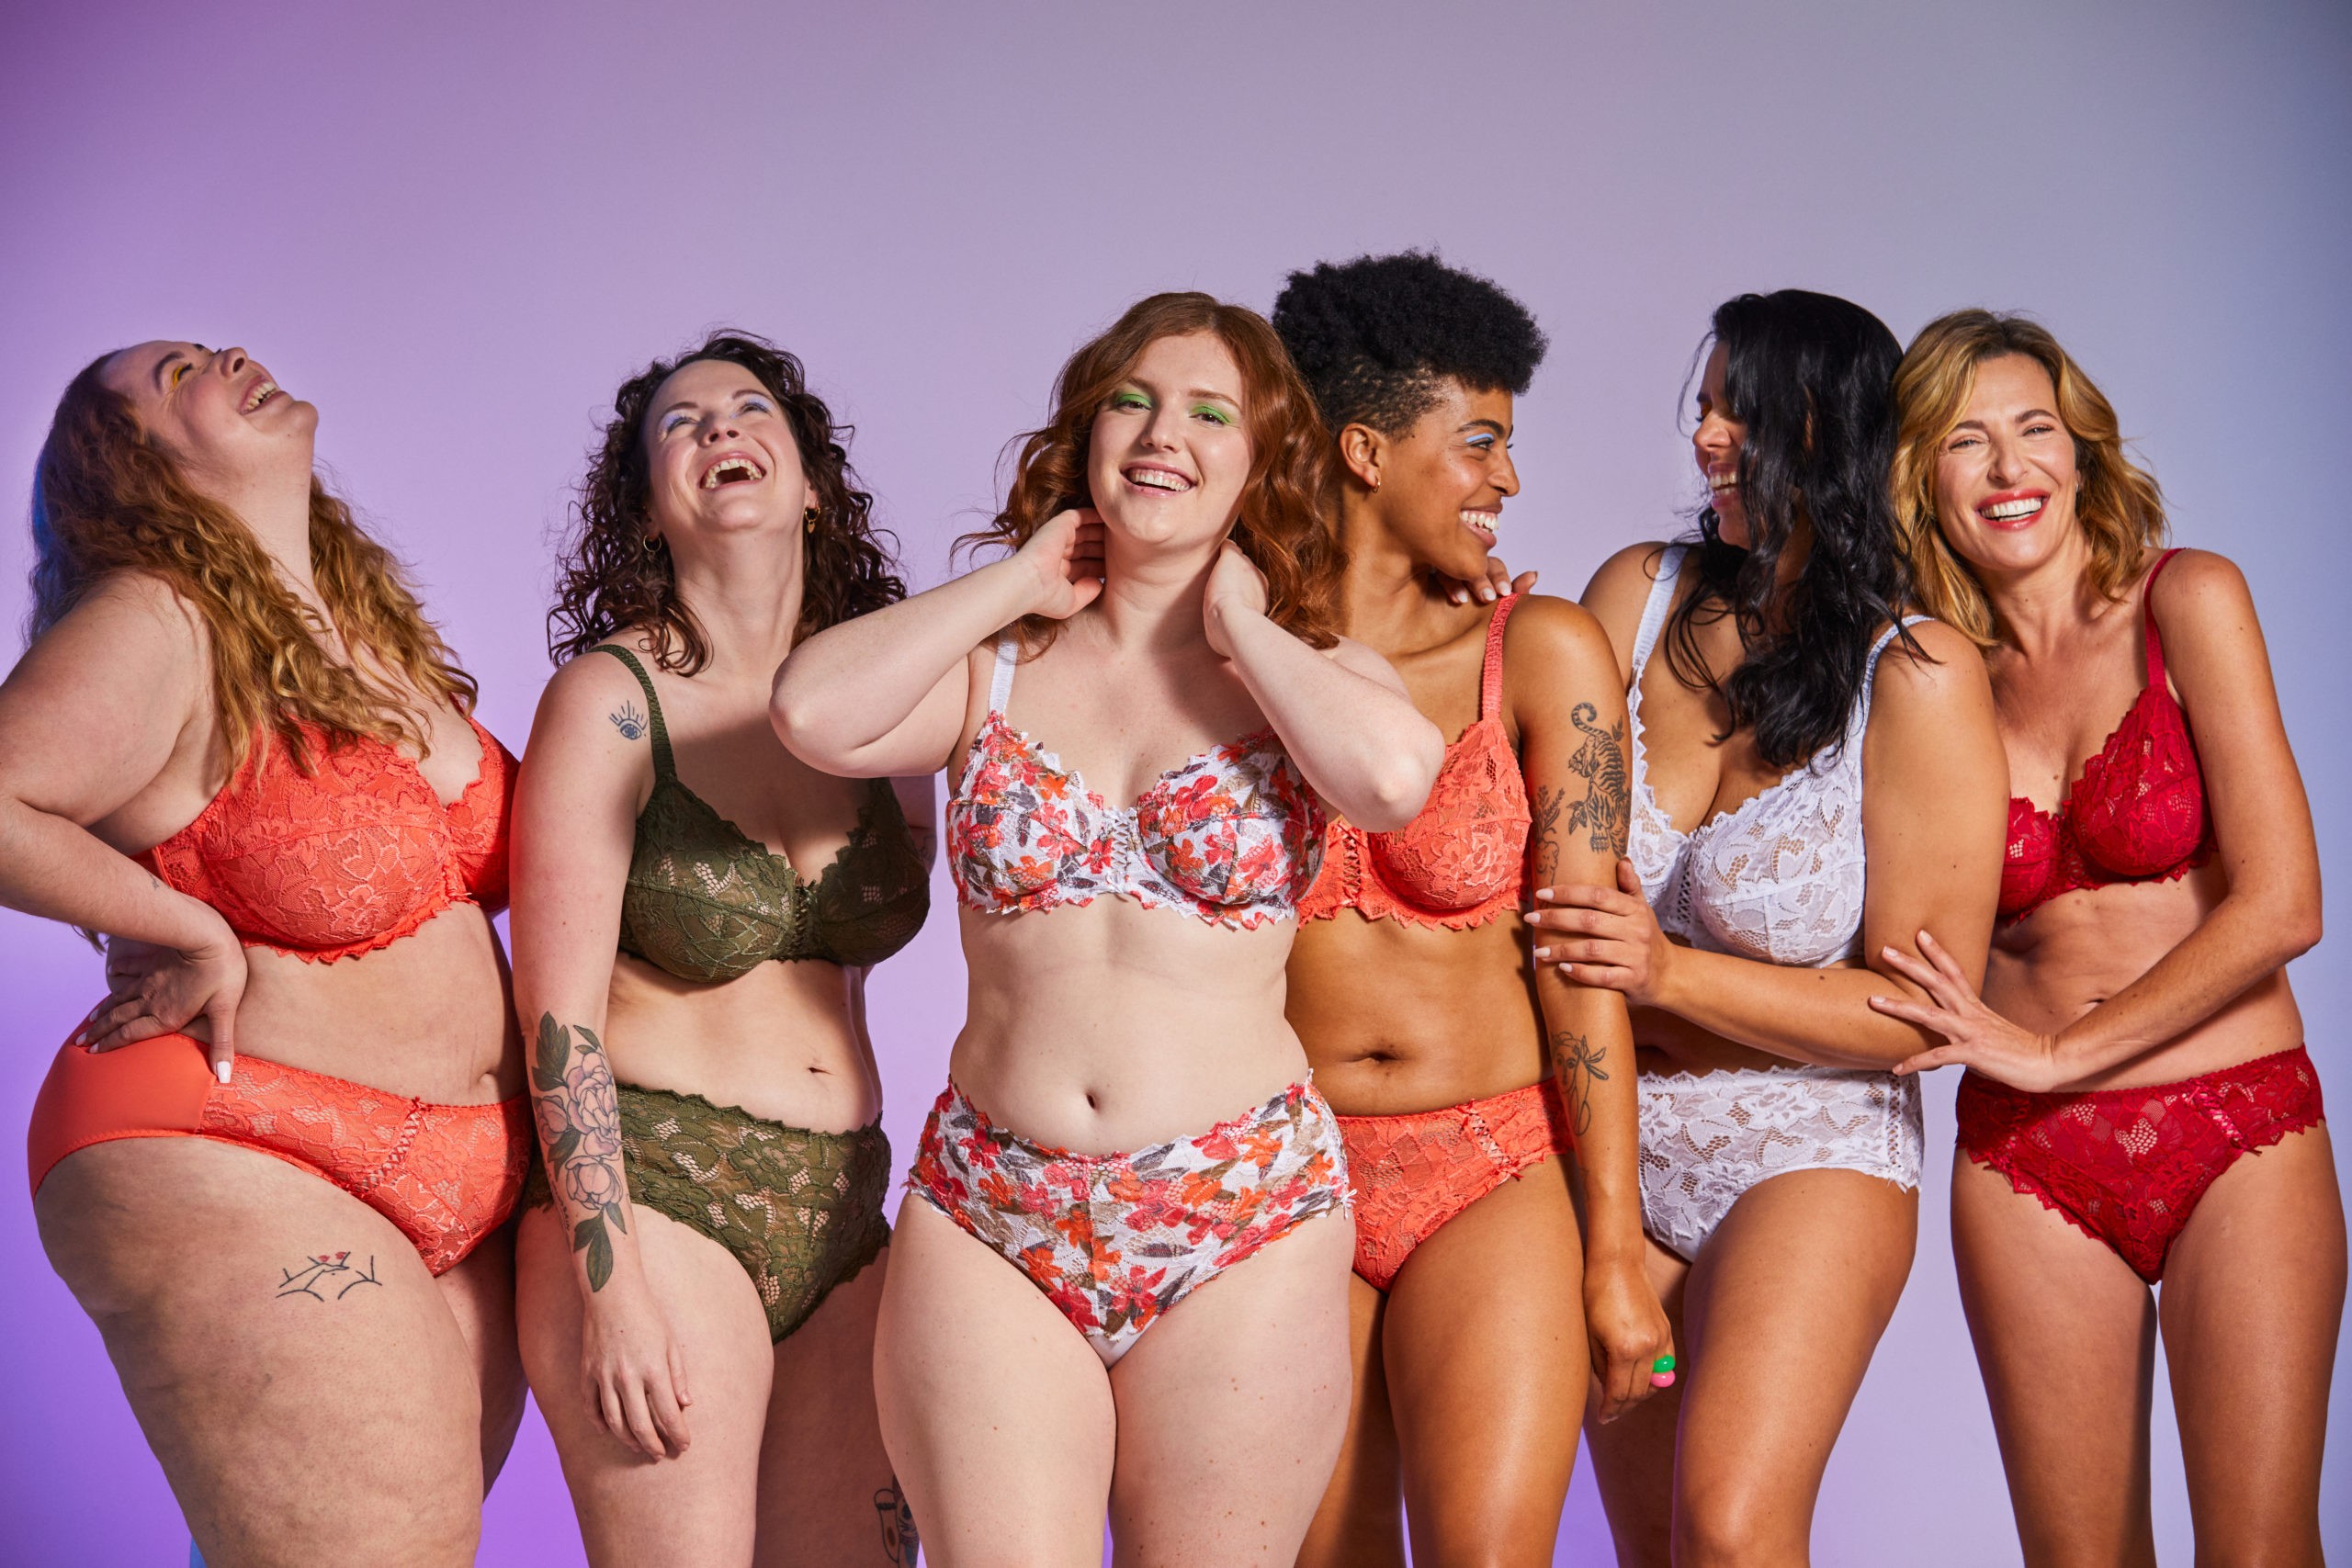 Shop the fun and colourful lingerie Oups! By Sans Complexe